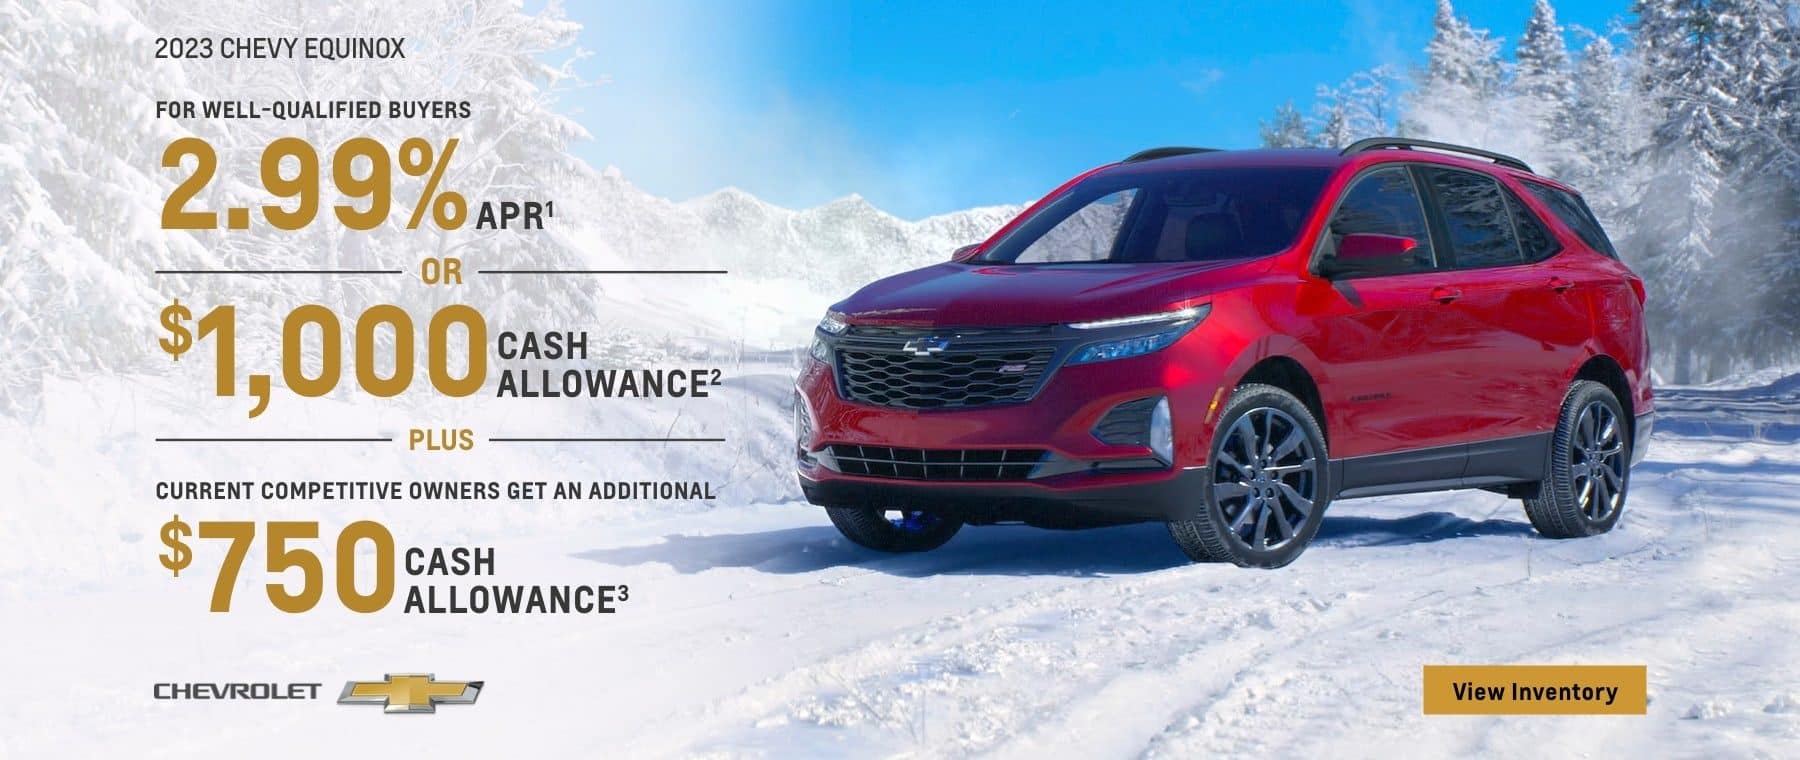 2023 Chevy Equinox. For well-qualified buyers 2.99% APR. Or, $1,000 cash allowance. Plus, current competitive owners get an additional $750 cash allowance.